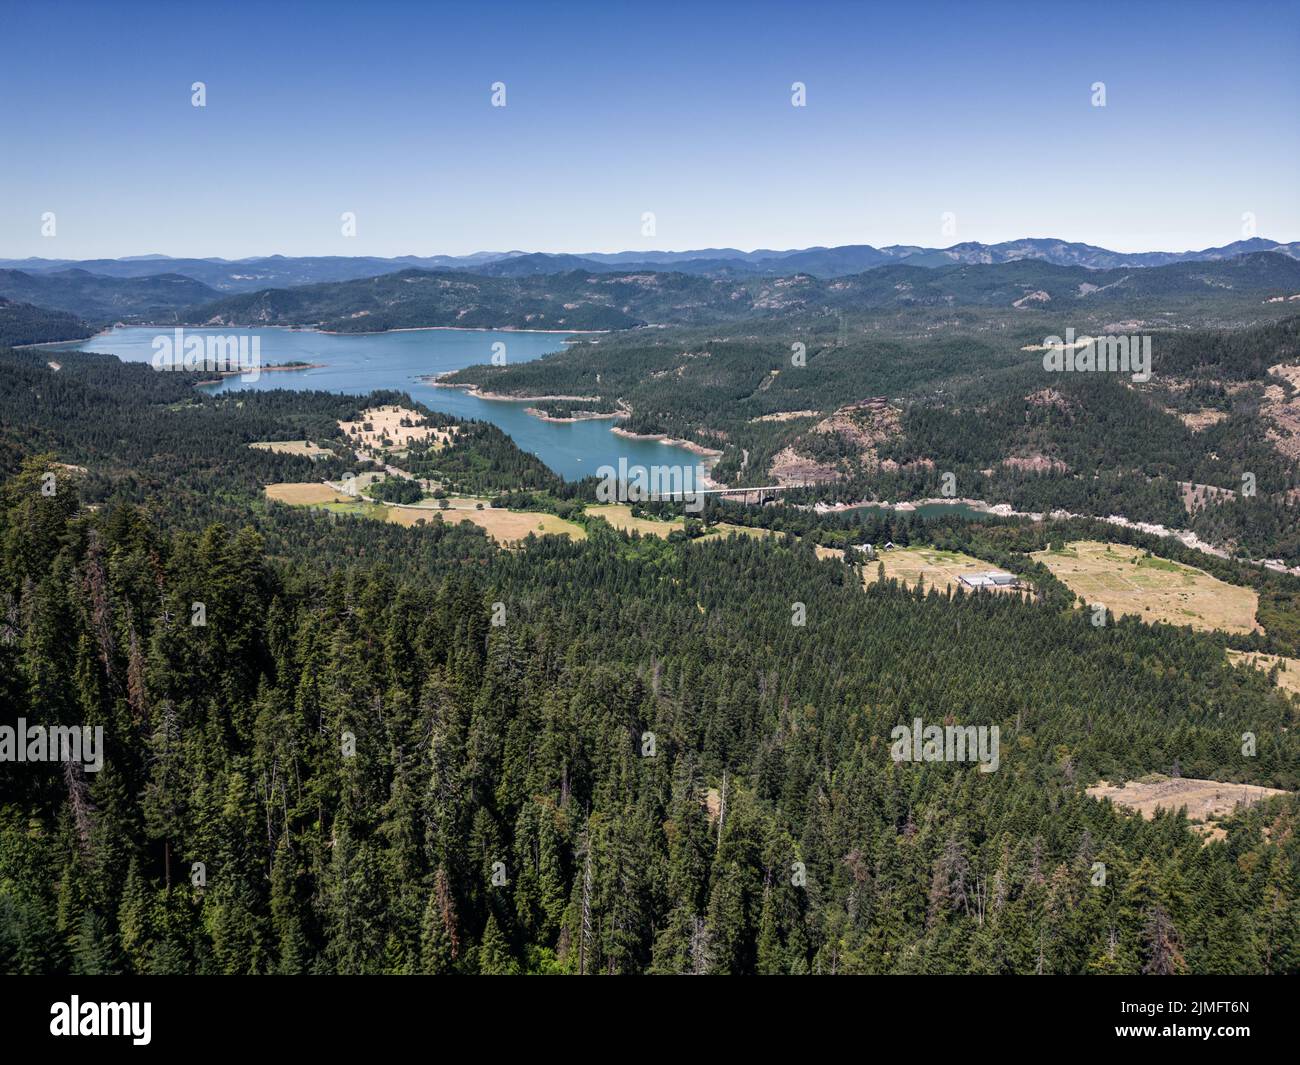 Aerial view of lost creek lake and and Payton bridge from the top of a mountain Stock Photo